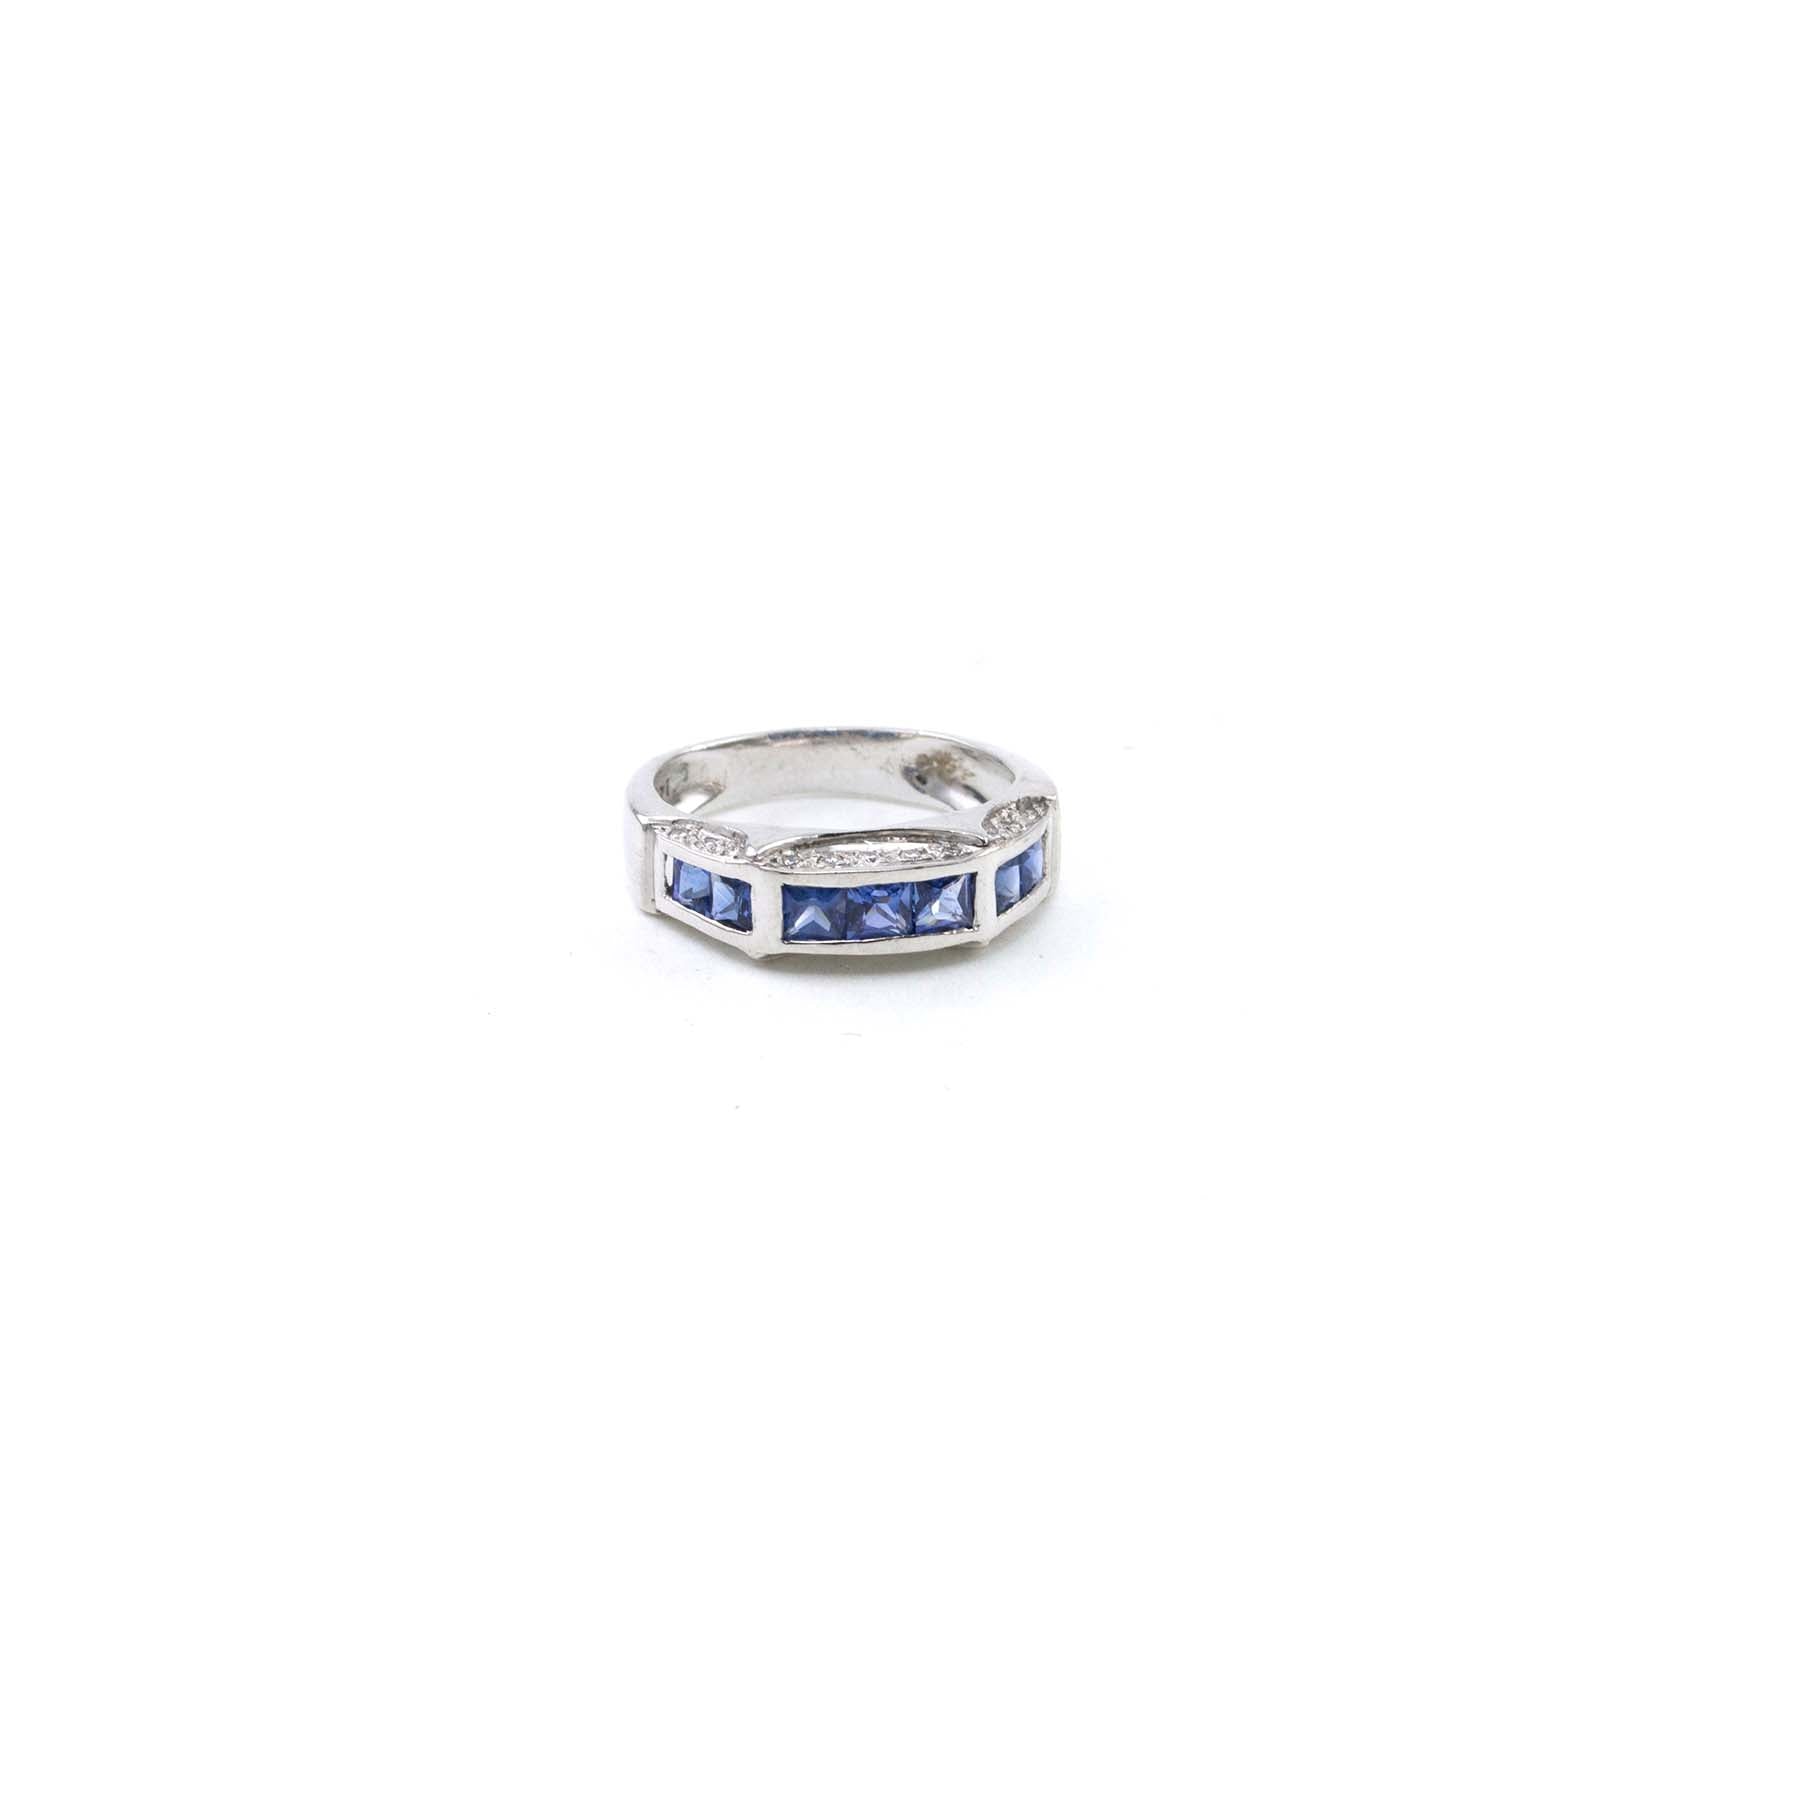 14k White Gold 3 Section Sapphire Diamond Ring - Size 7